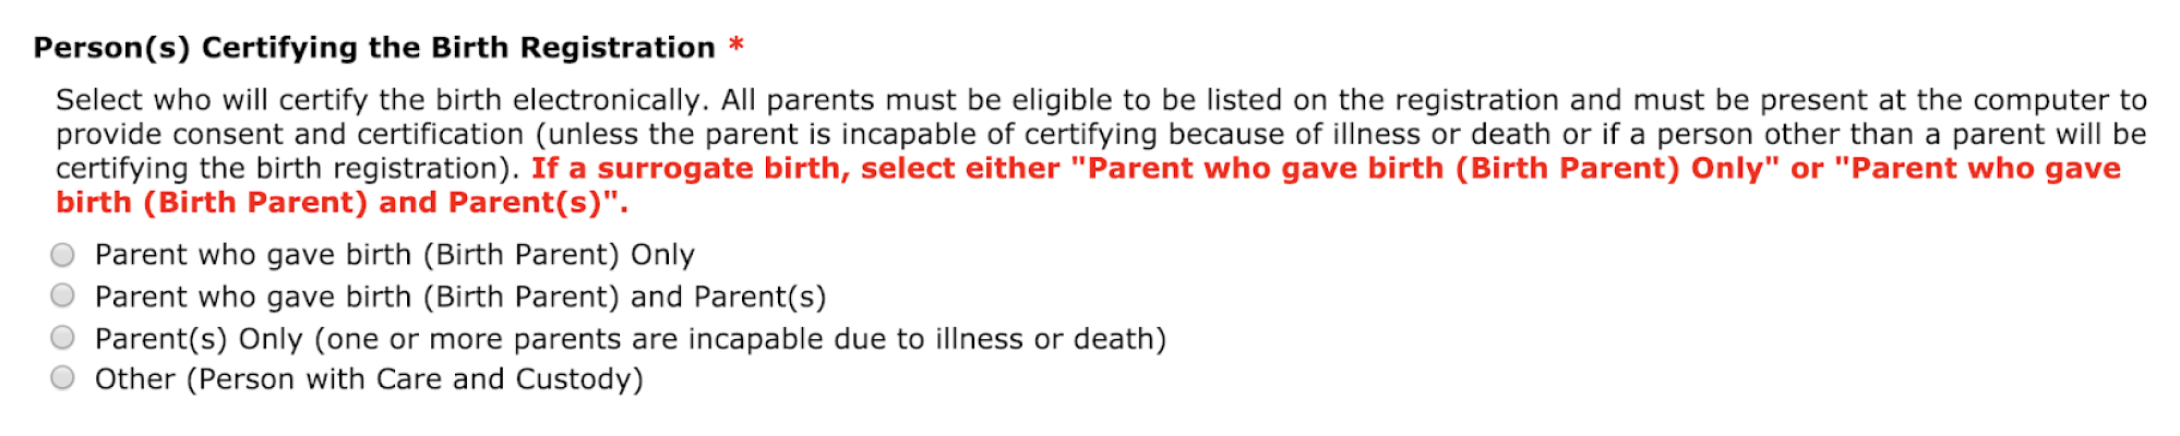 Question for person certifying the birth registration. Selections include: parent who gave birth (birth parent) only, parent who gave birth (birth parent) and parent(s), parent(s) only (one or more parents are incapable due to illness or death), other (person with care and custody).